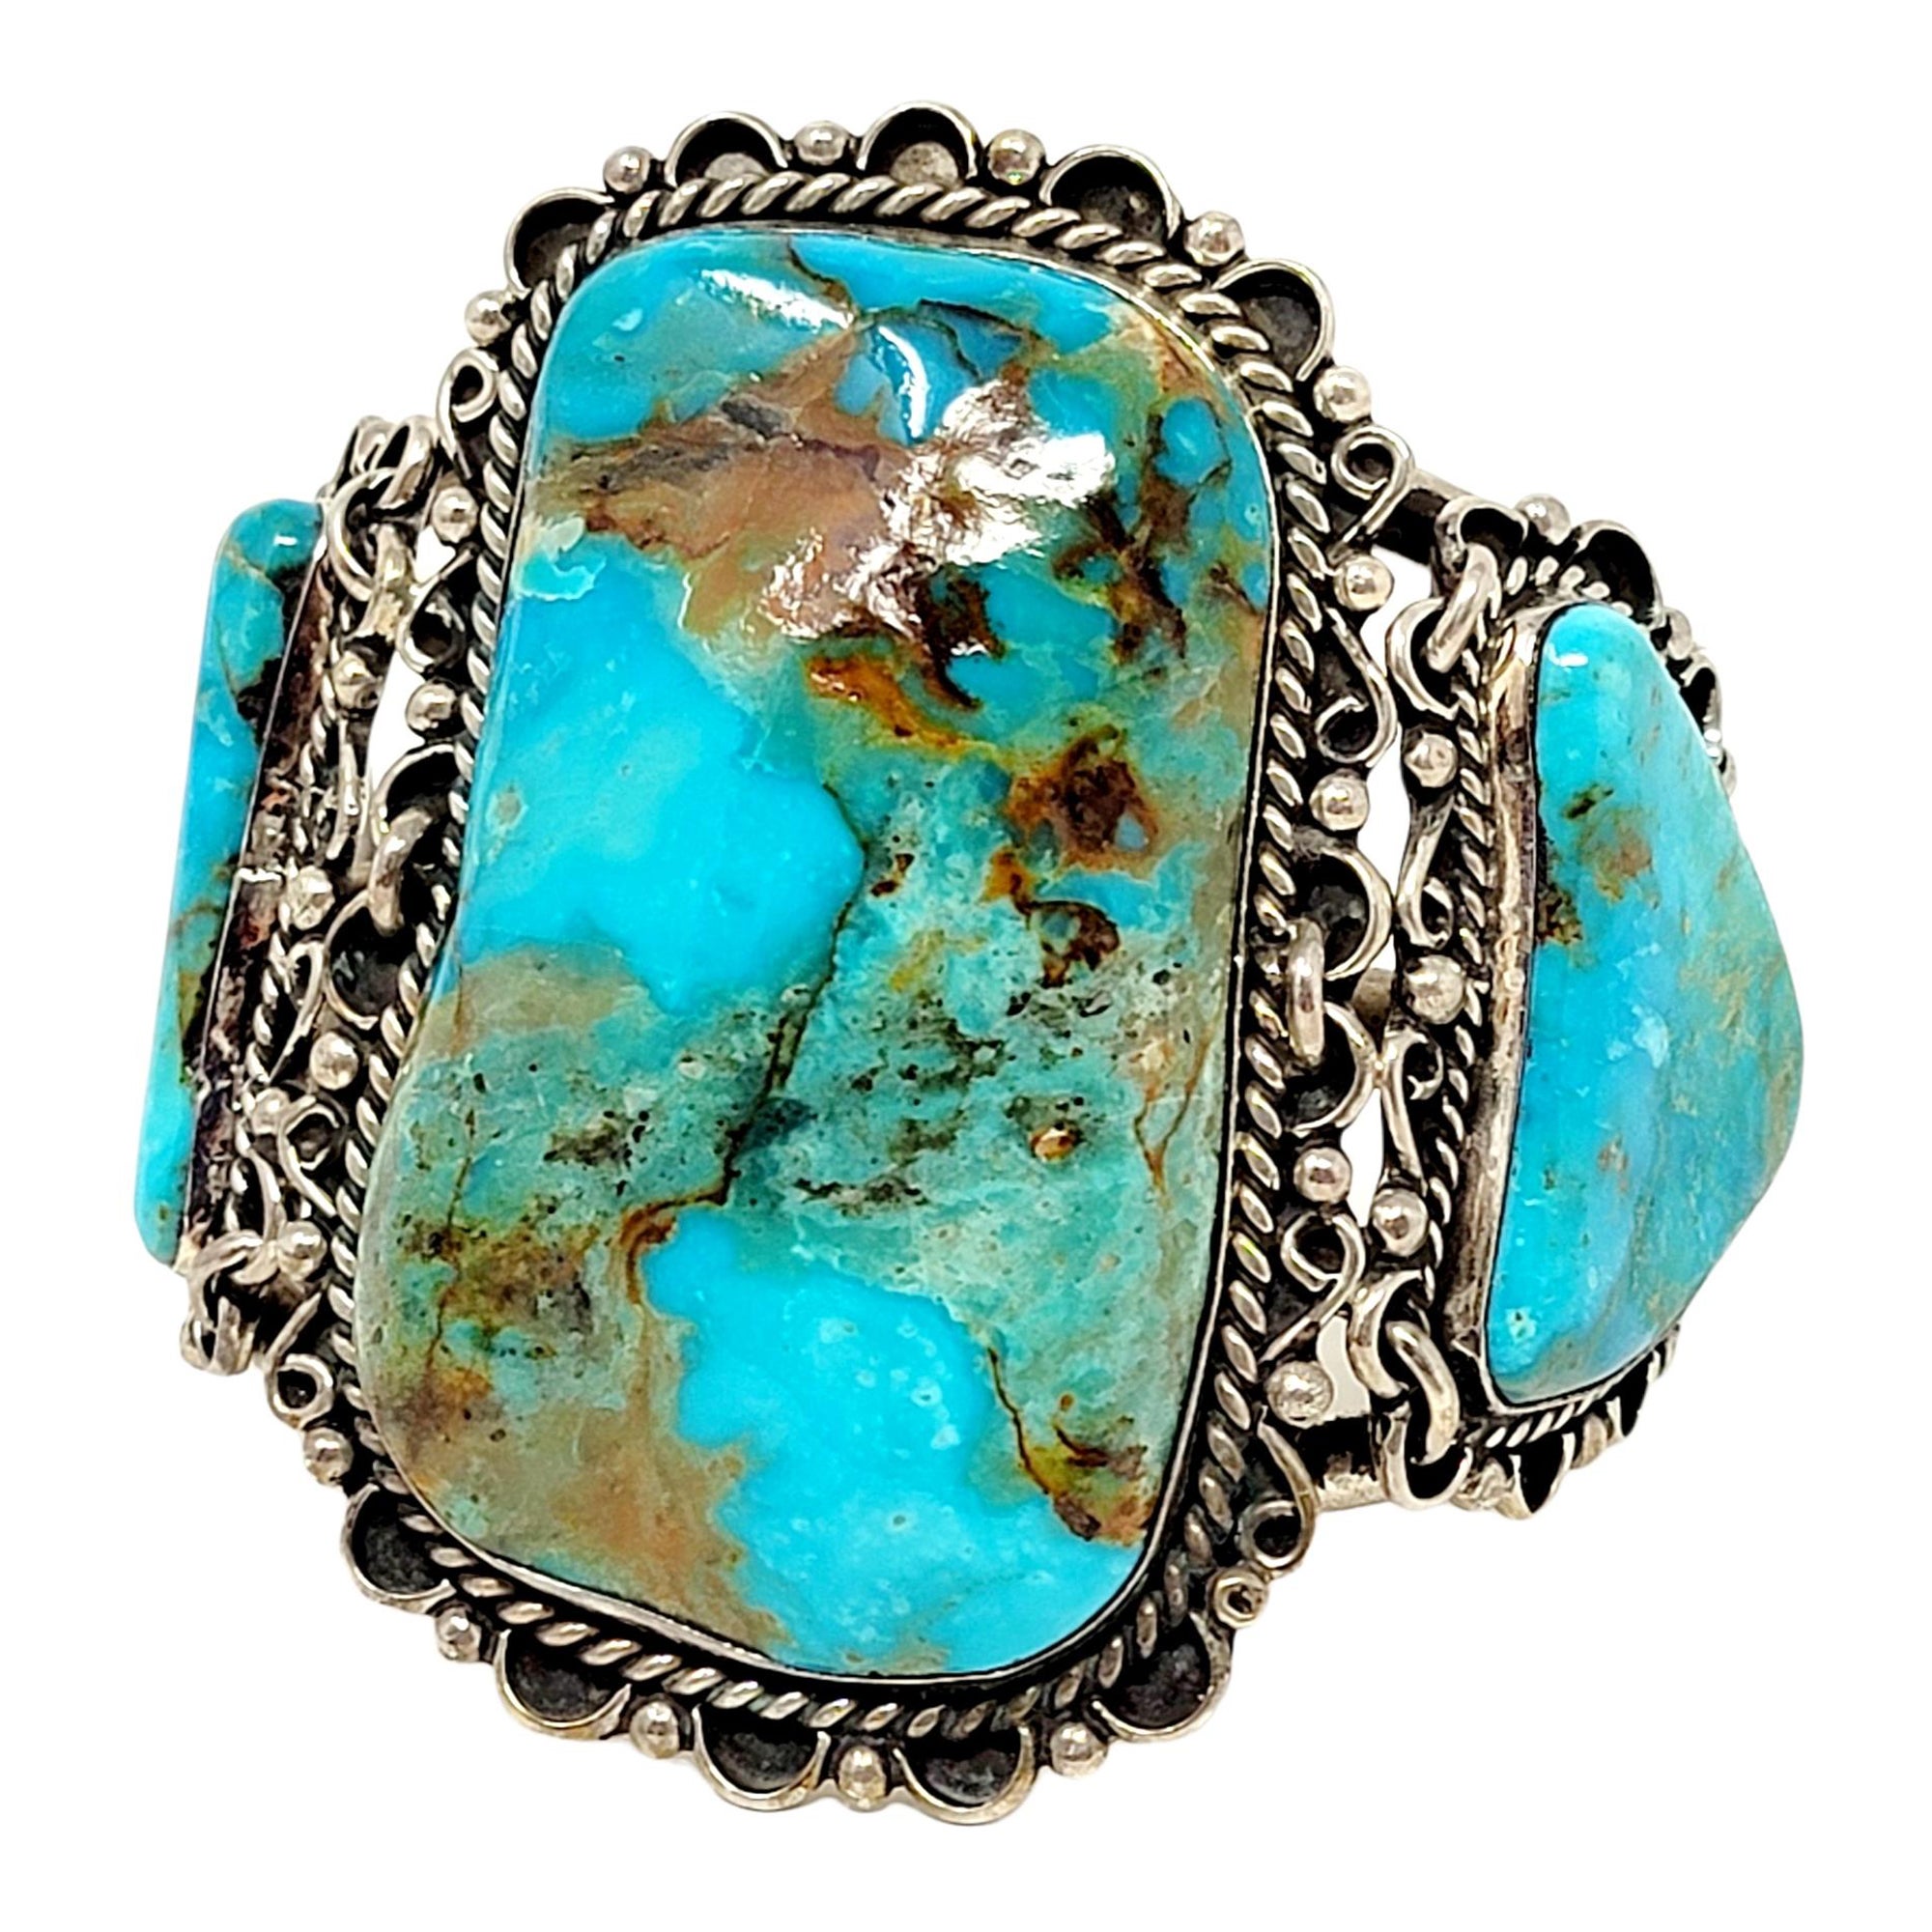 M. Weahkee Oversize Sterling Silver and Natural Turquoise Navajo Cuff Bracelet